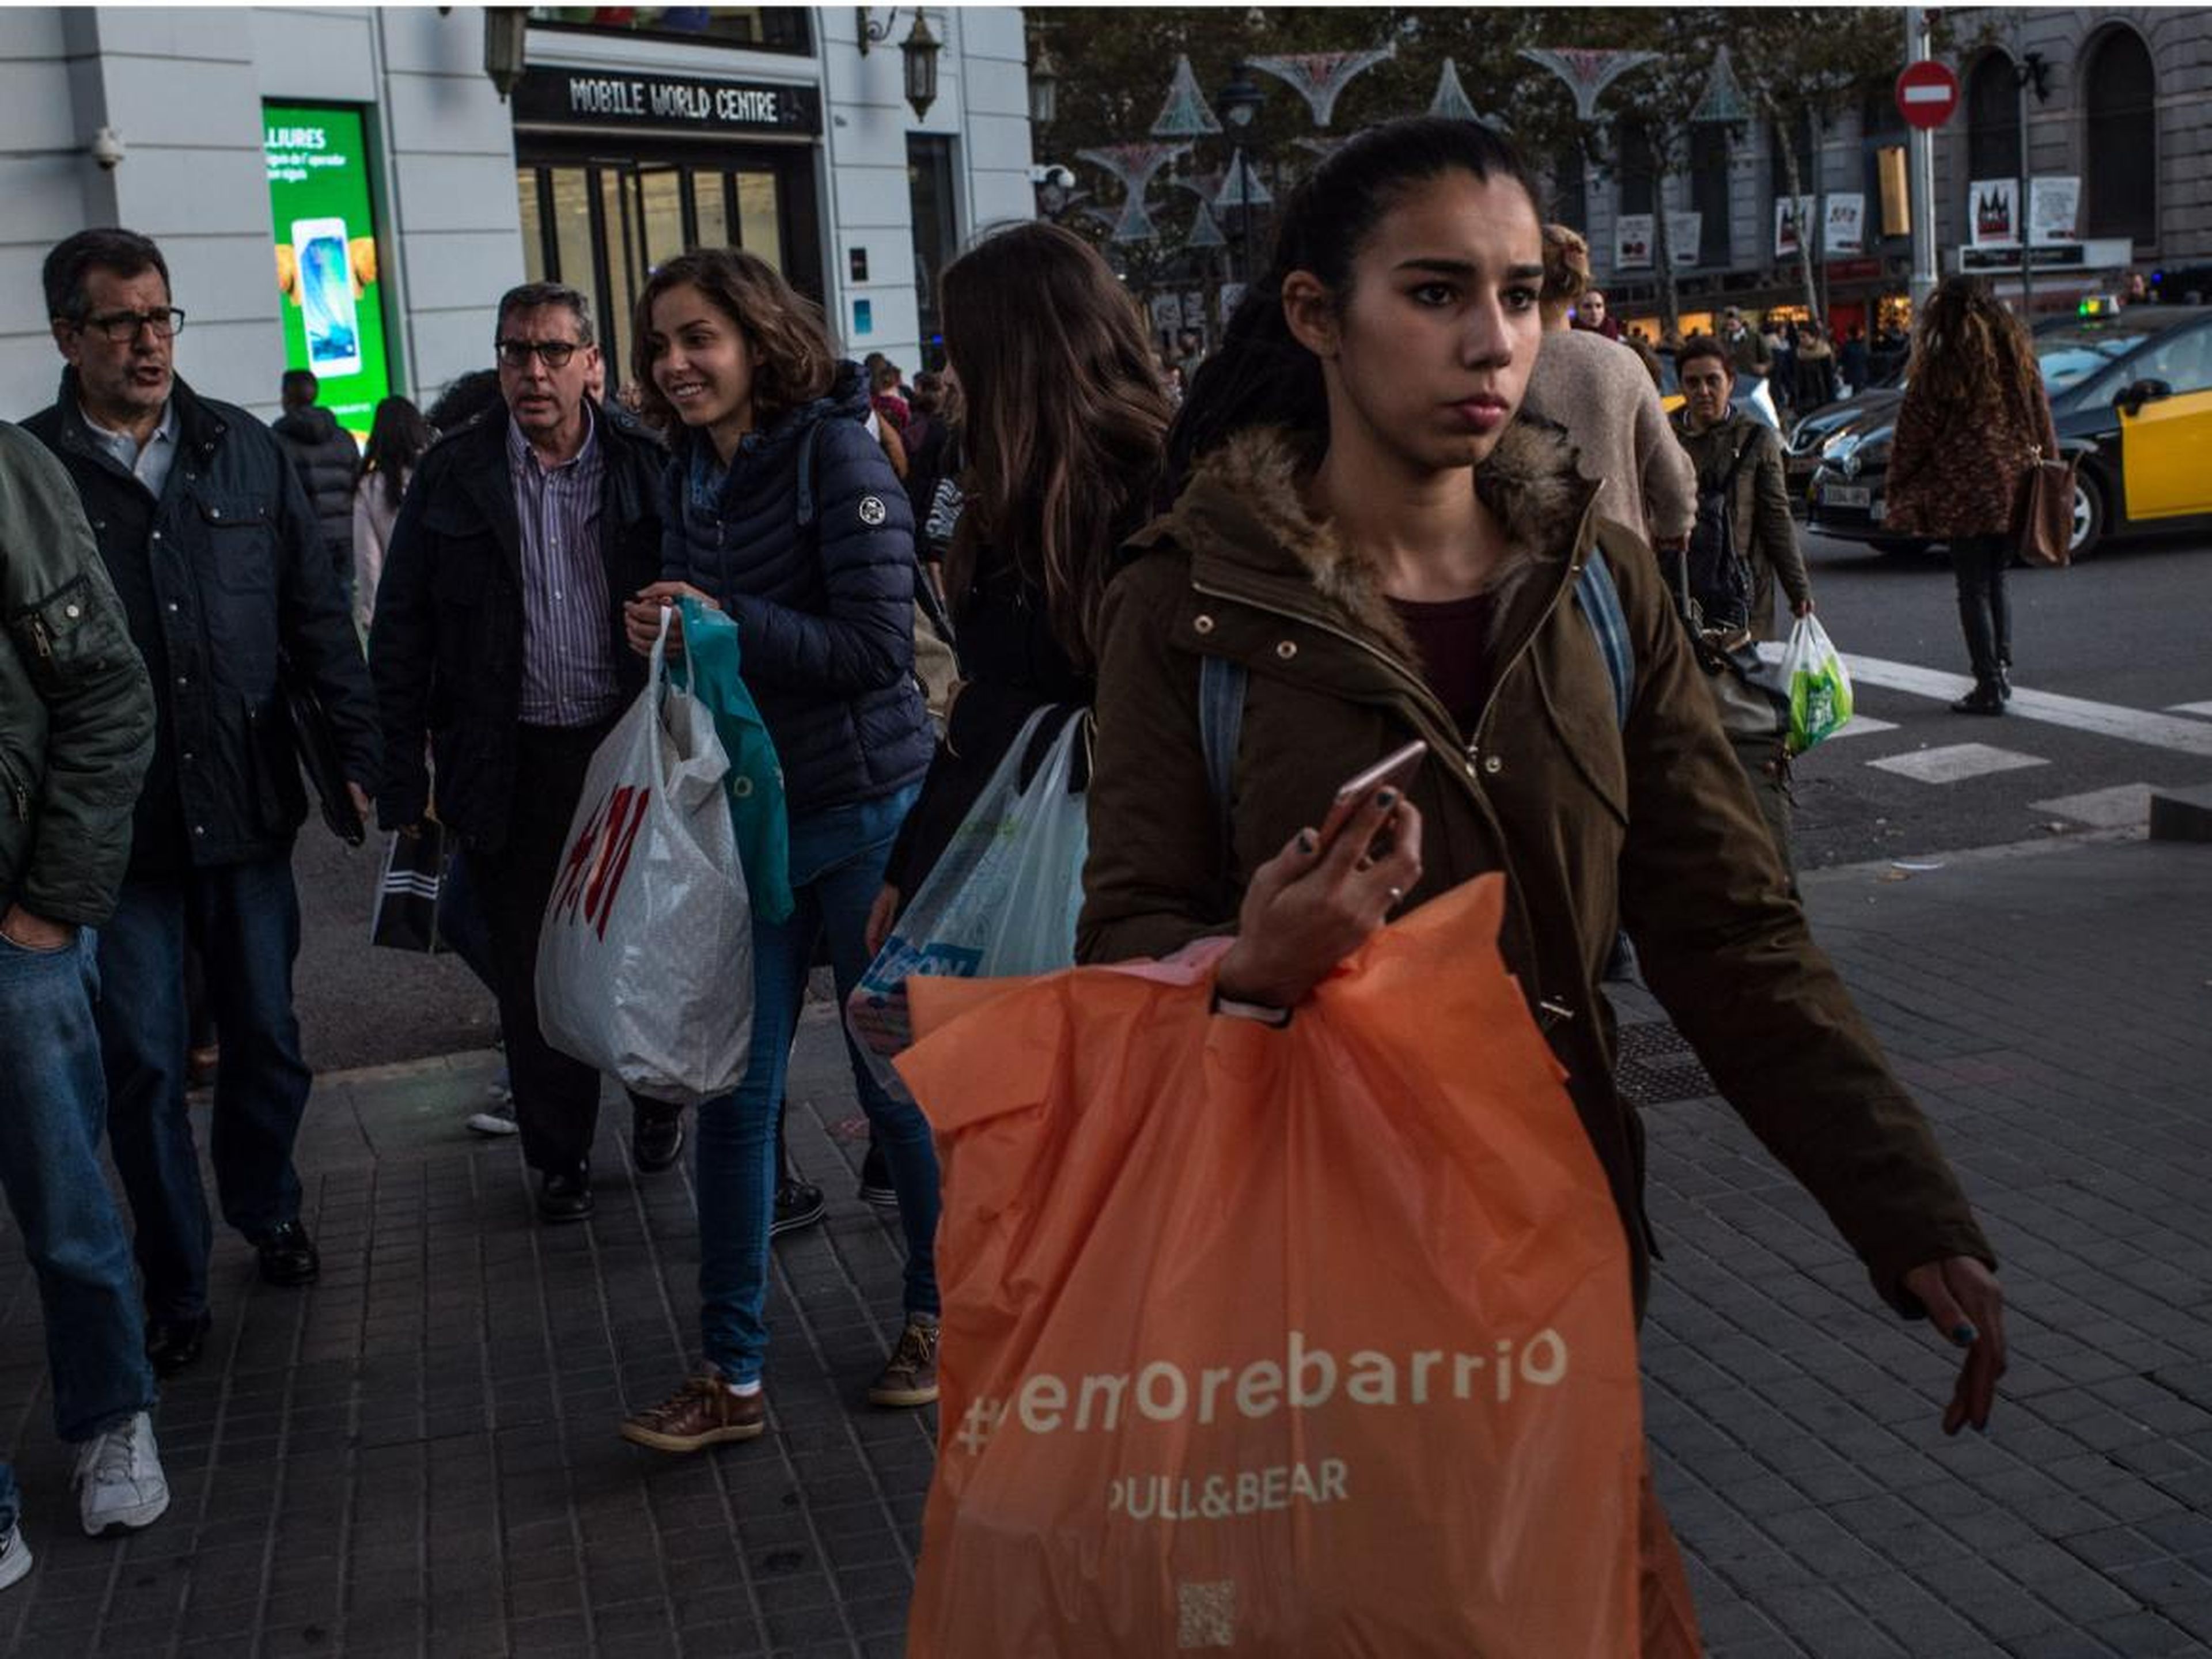 Spanish retailers, like clothing stores Zara and Mango, saw a 35% increase in sales during Black Friday weekend in 2017 from the previous year as the shopping holiday grows increasingly more popular.